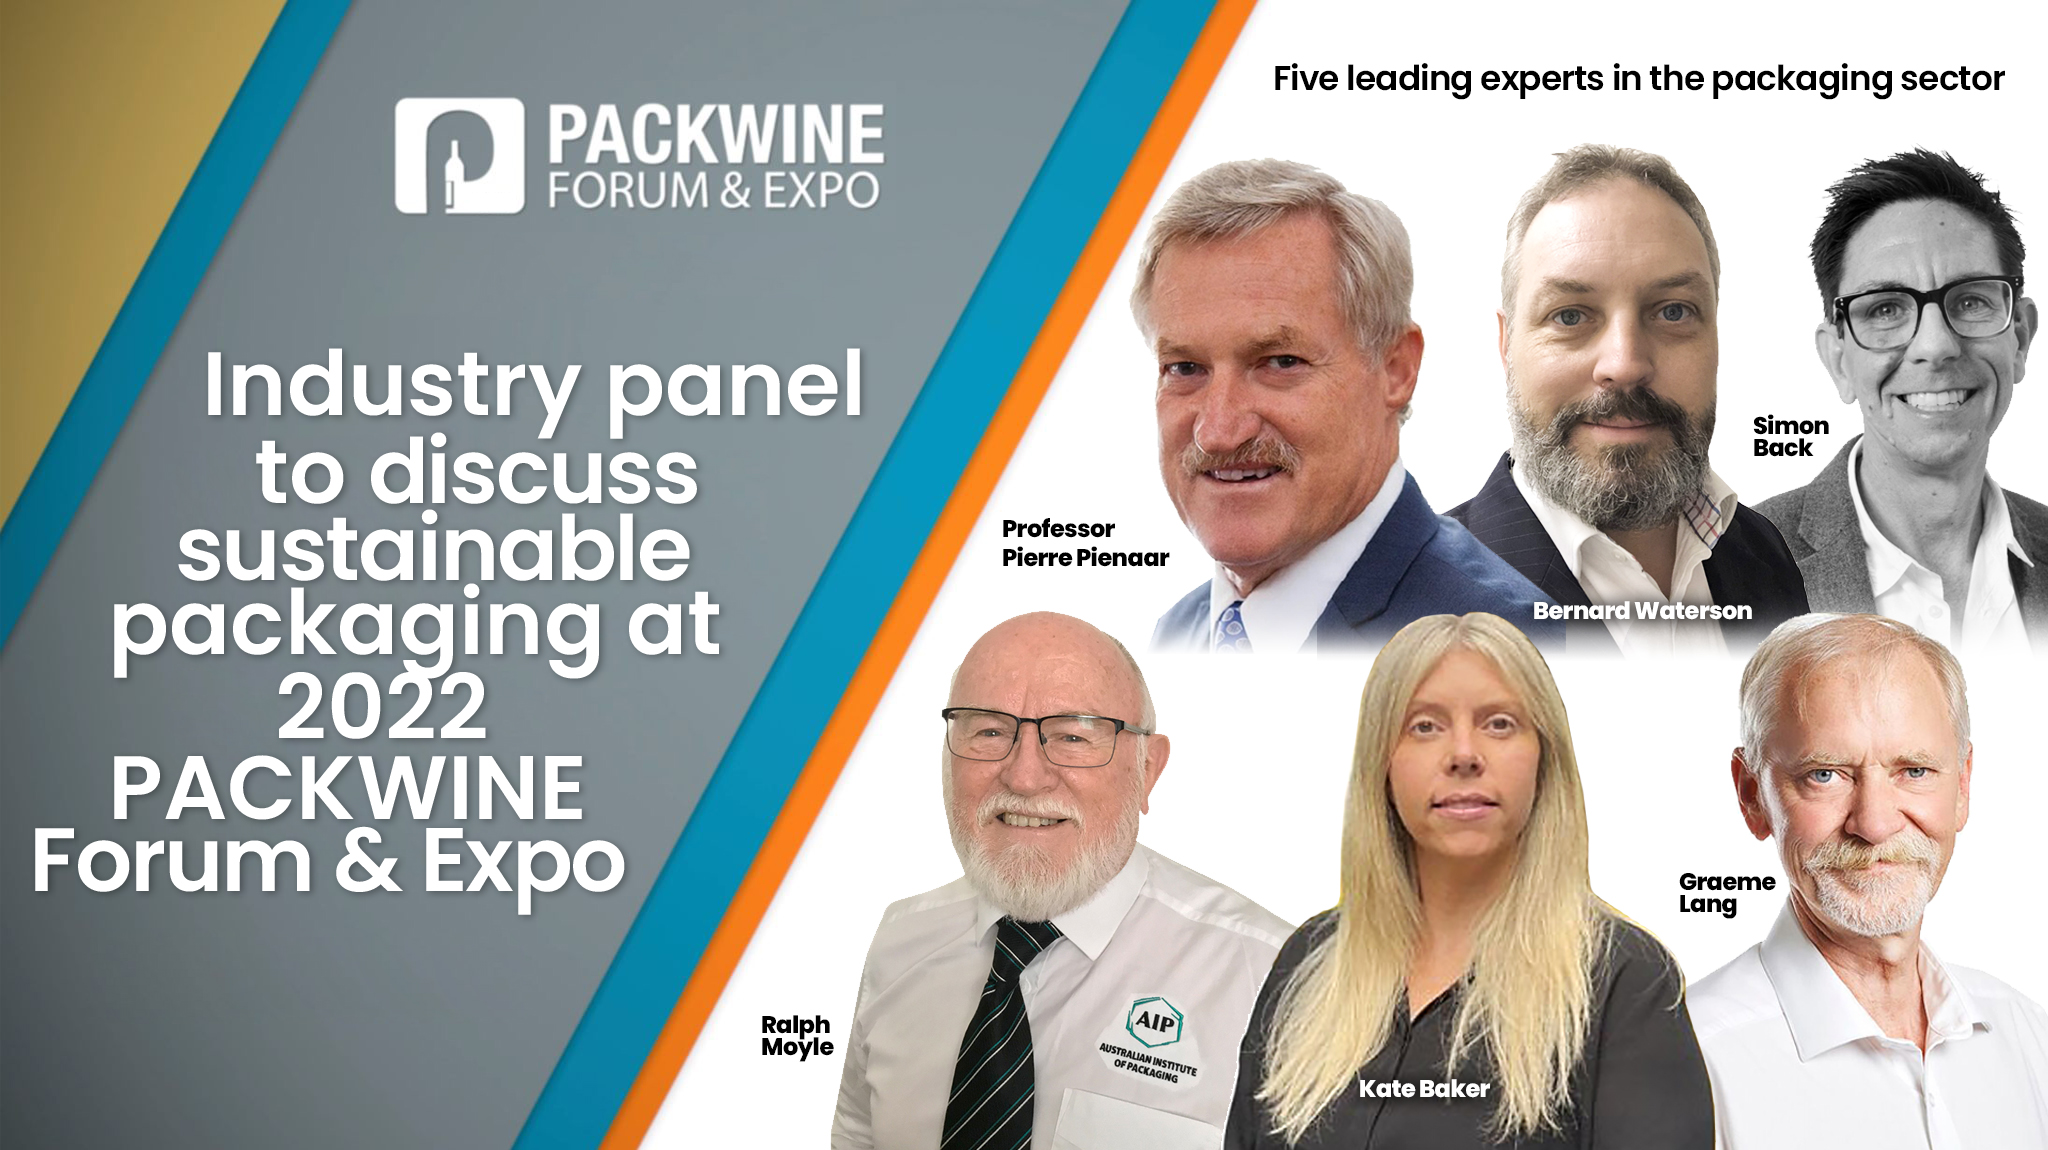 Industry panel to discuss sustainable packaging at 2022 PACKWINE Forum & Expo